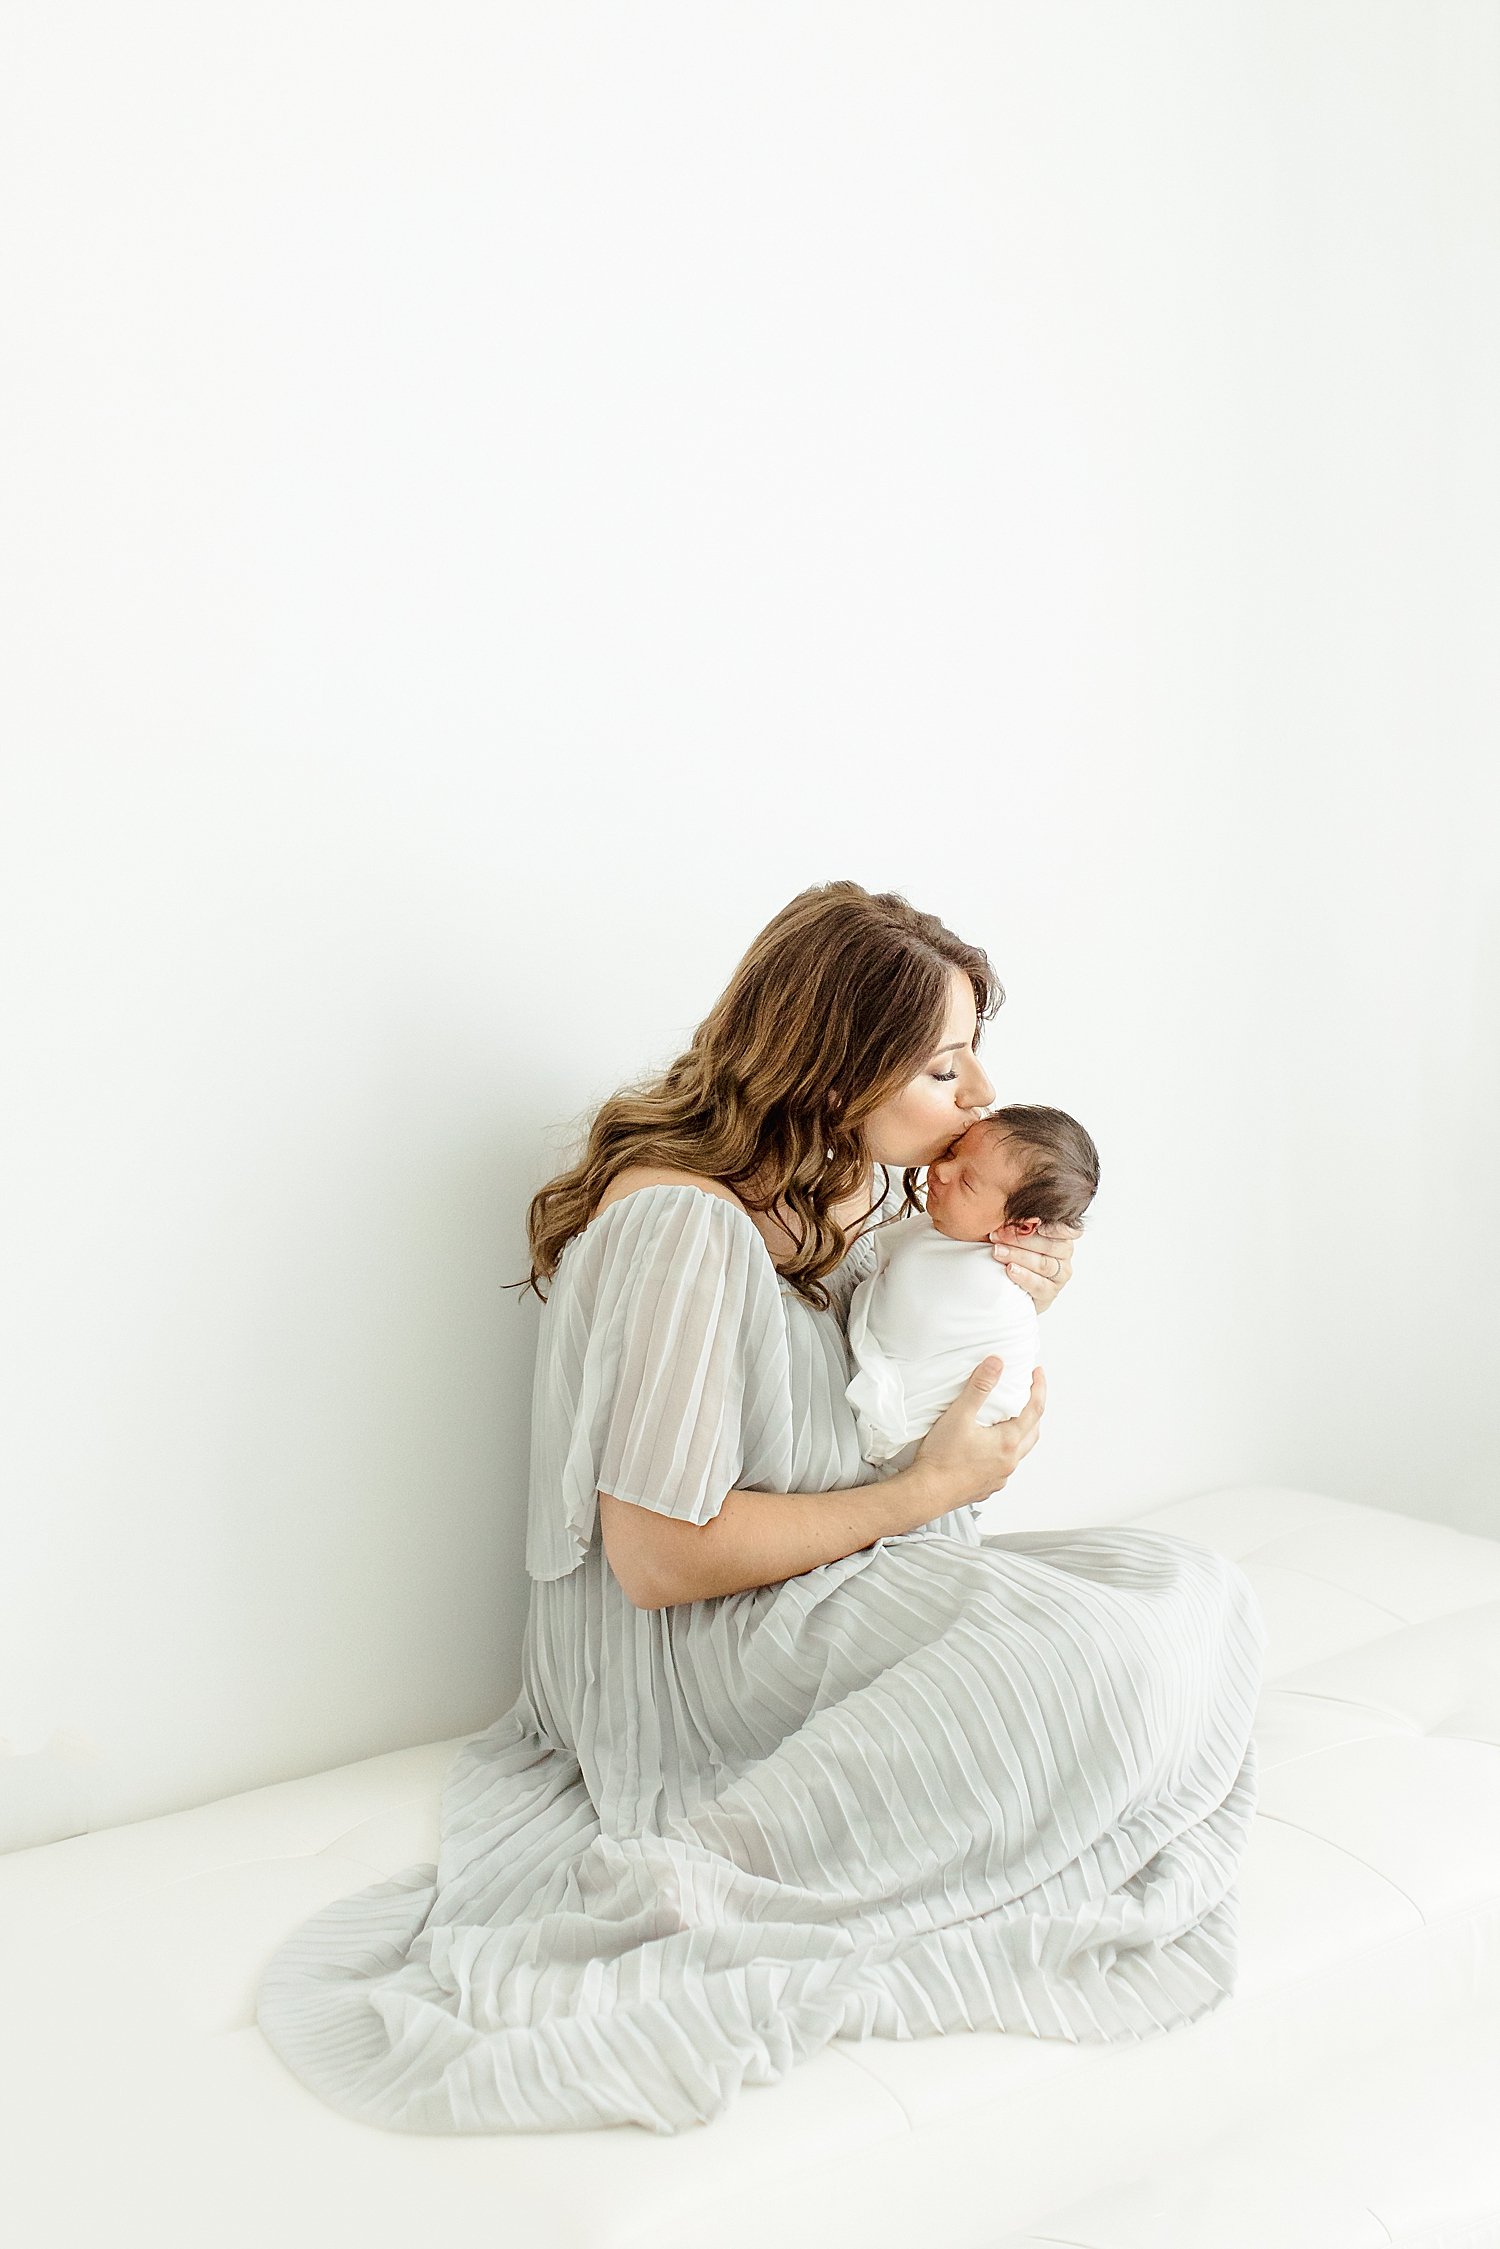 Mom holding her third baby boy during newborn session | Kristin Wood Photography